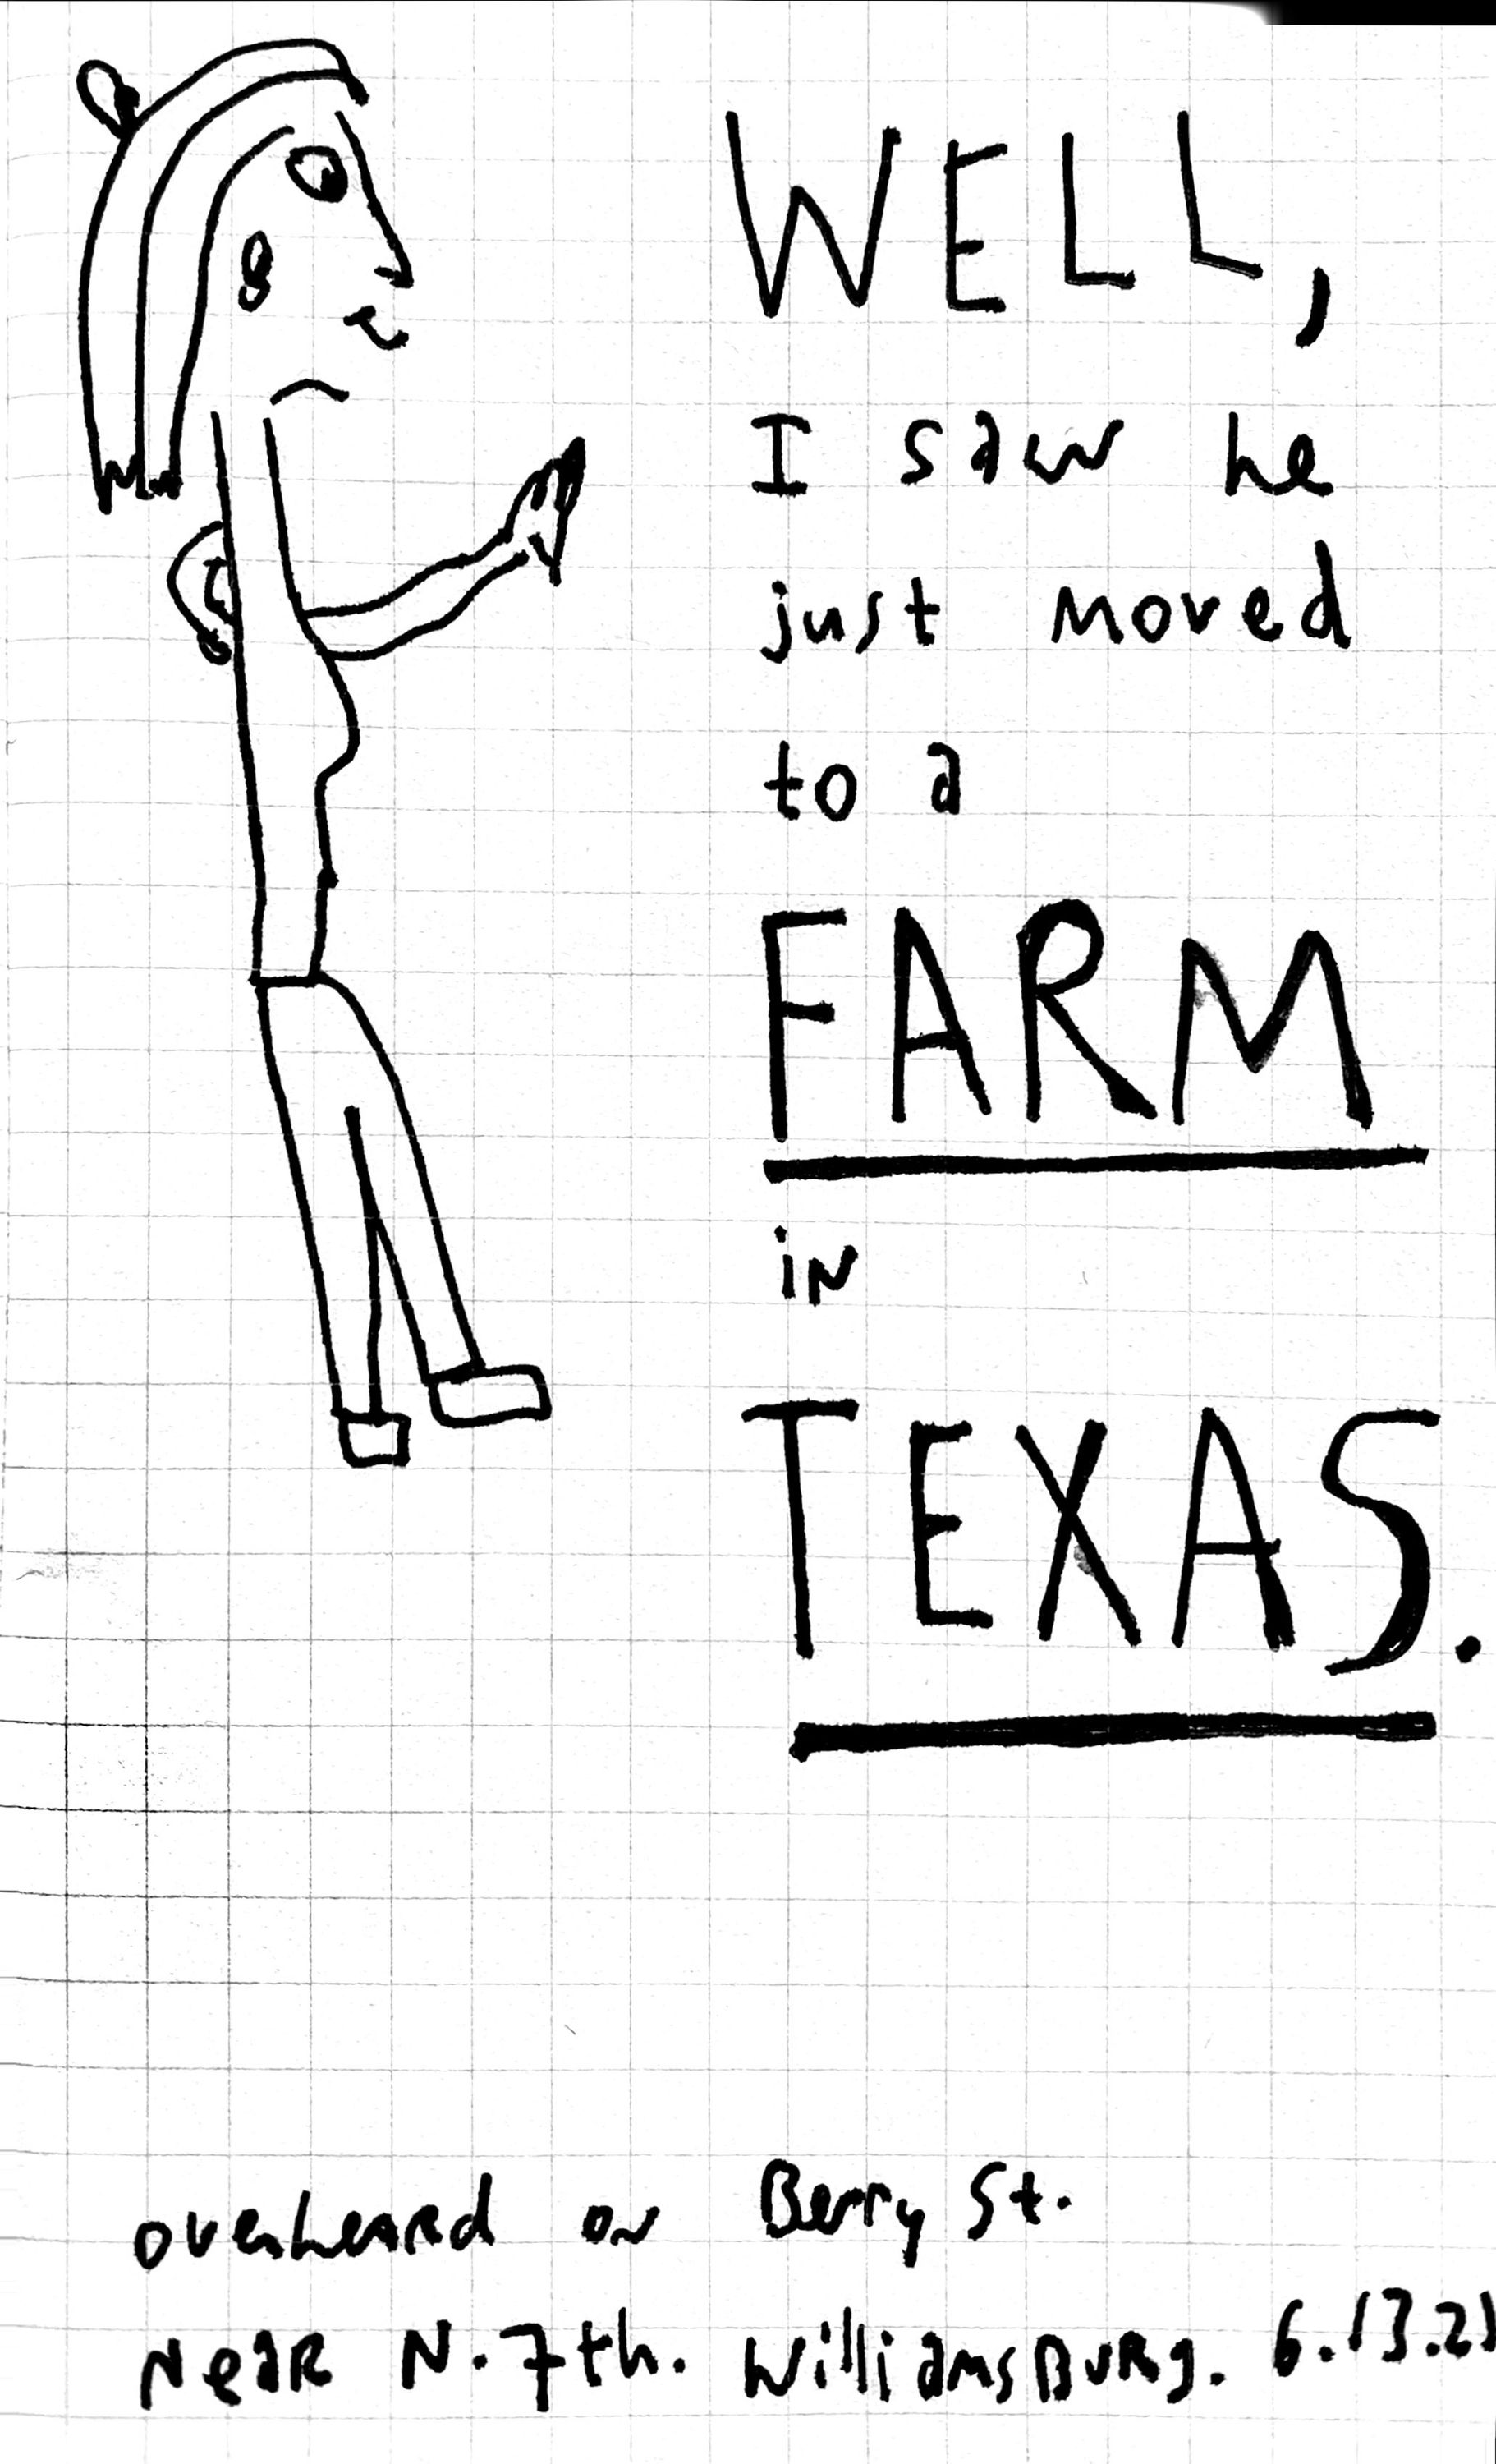 Well I just moved to a farm in Texas